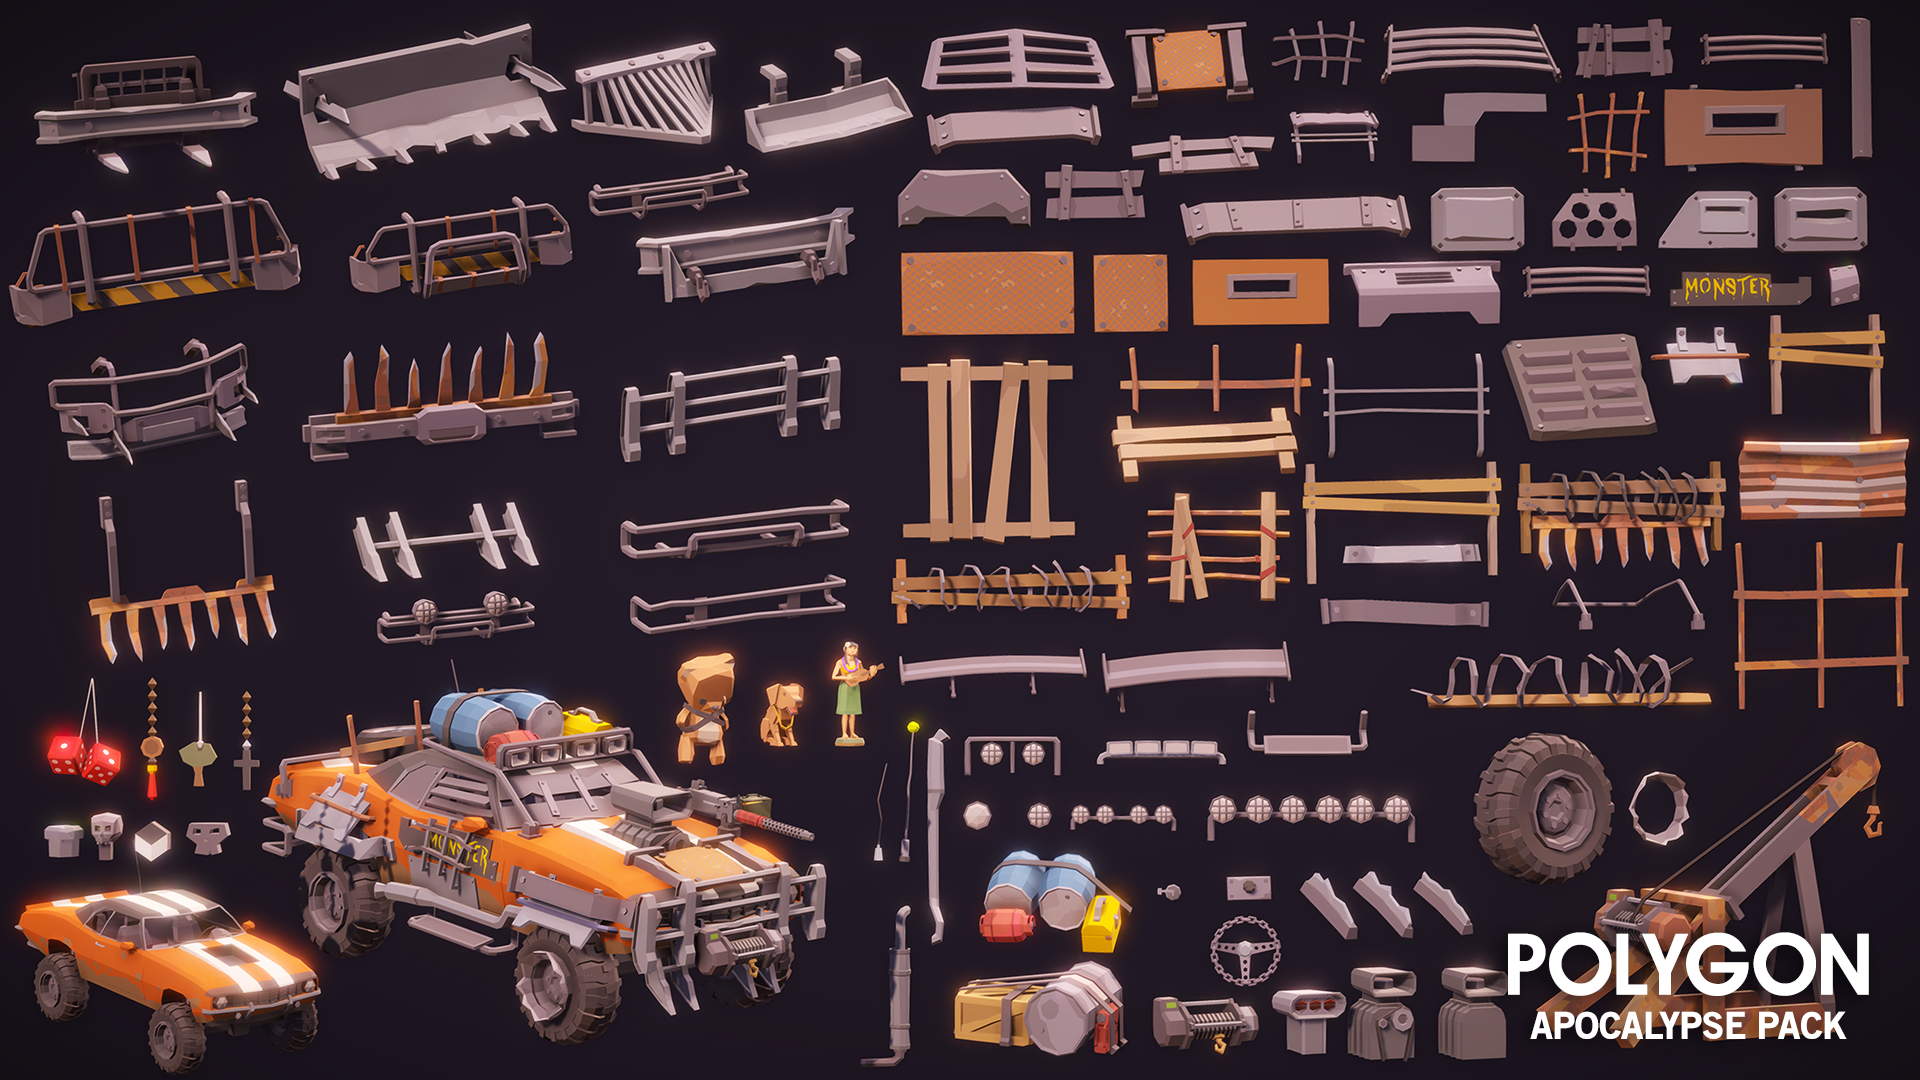 Apocalypse Pack 3D low poly wasteland prop assets for game development